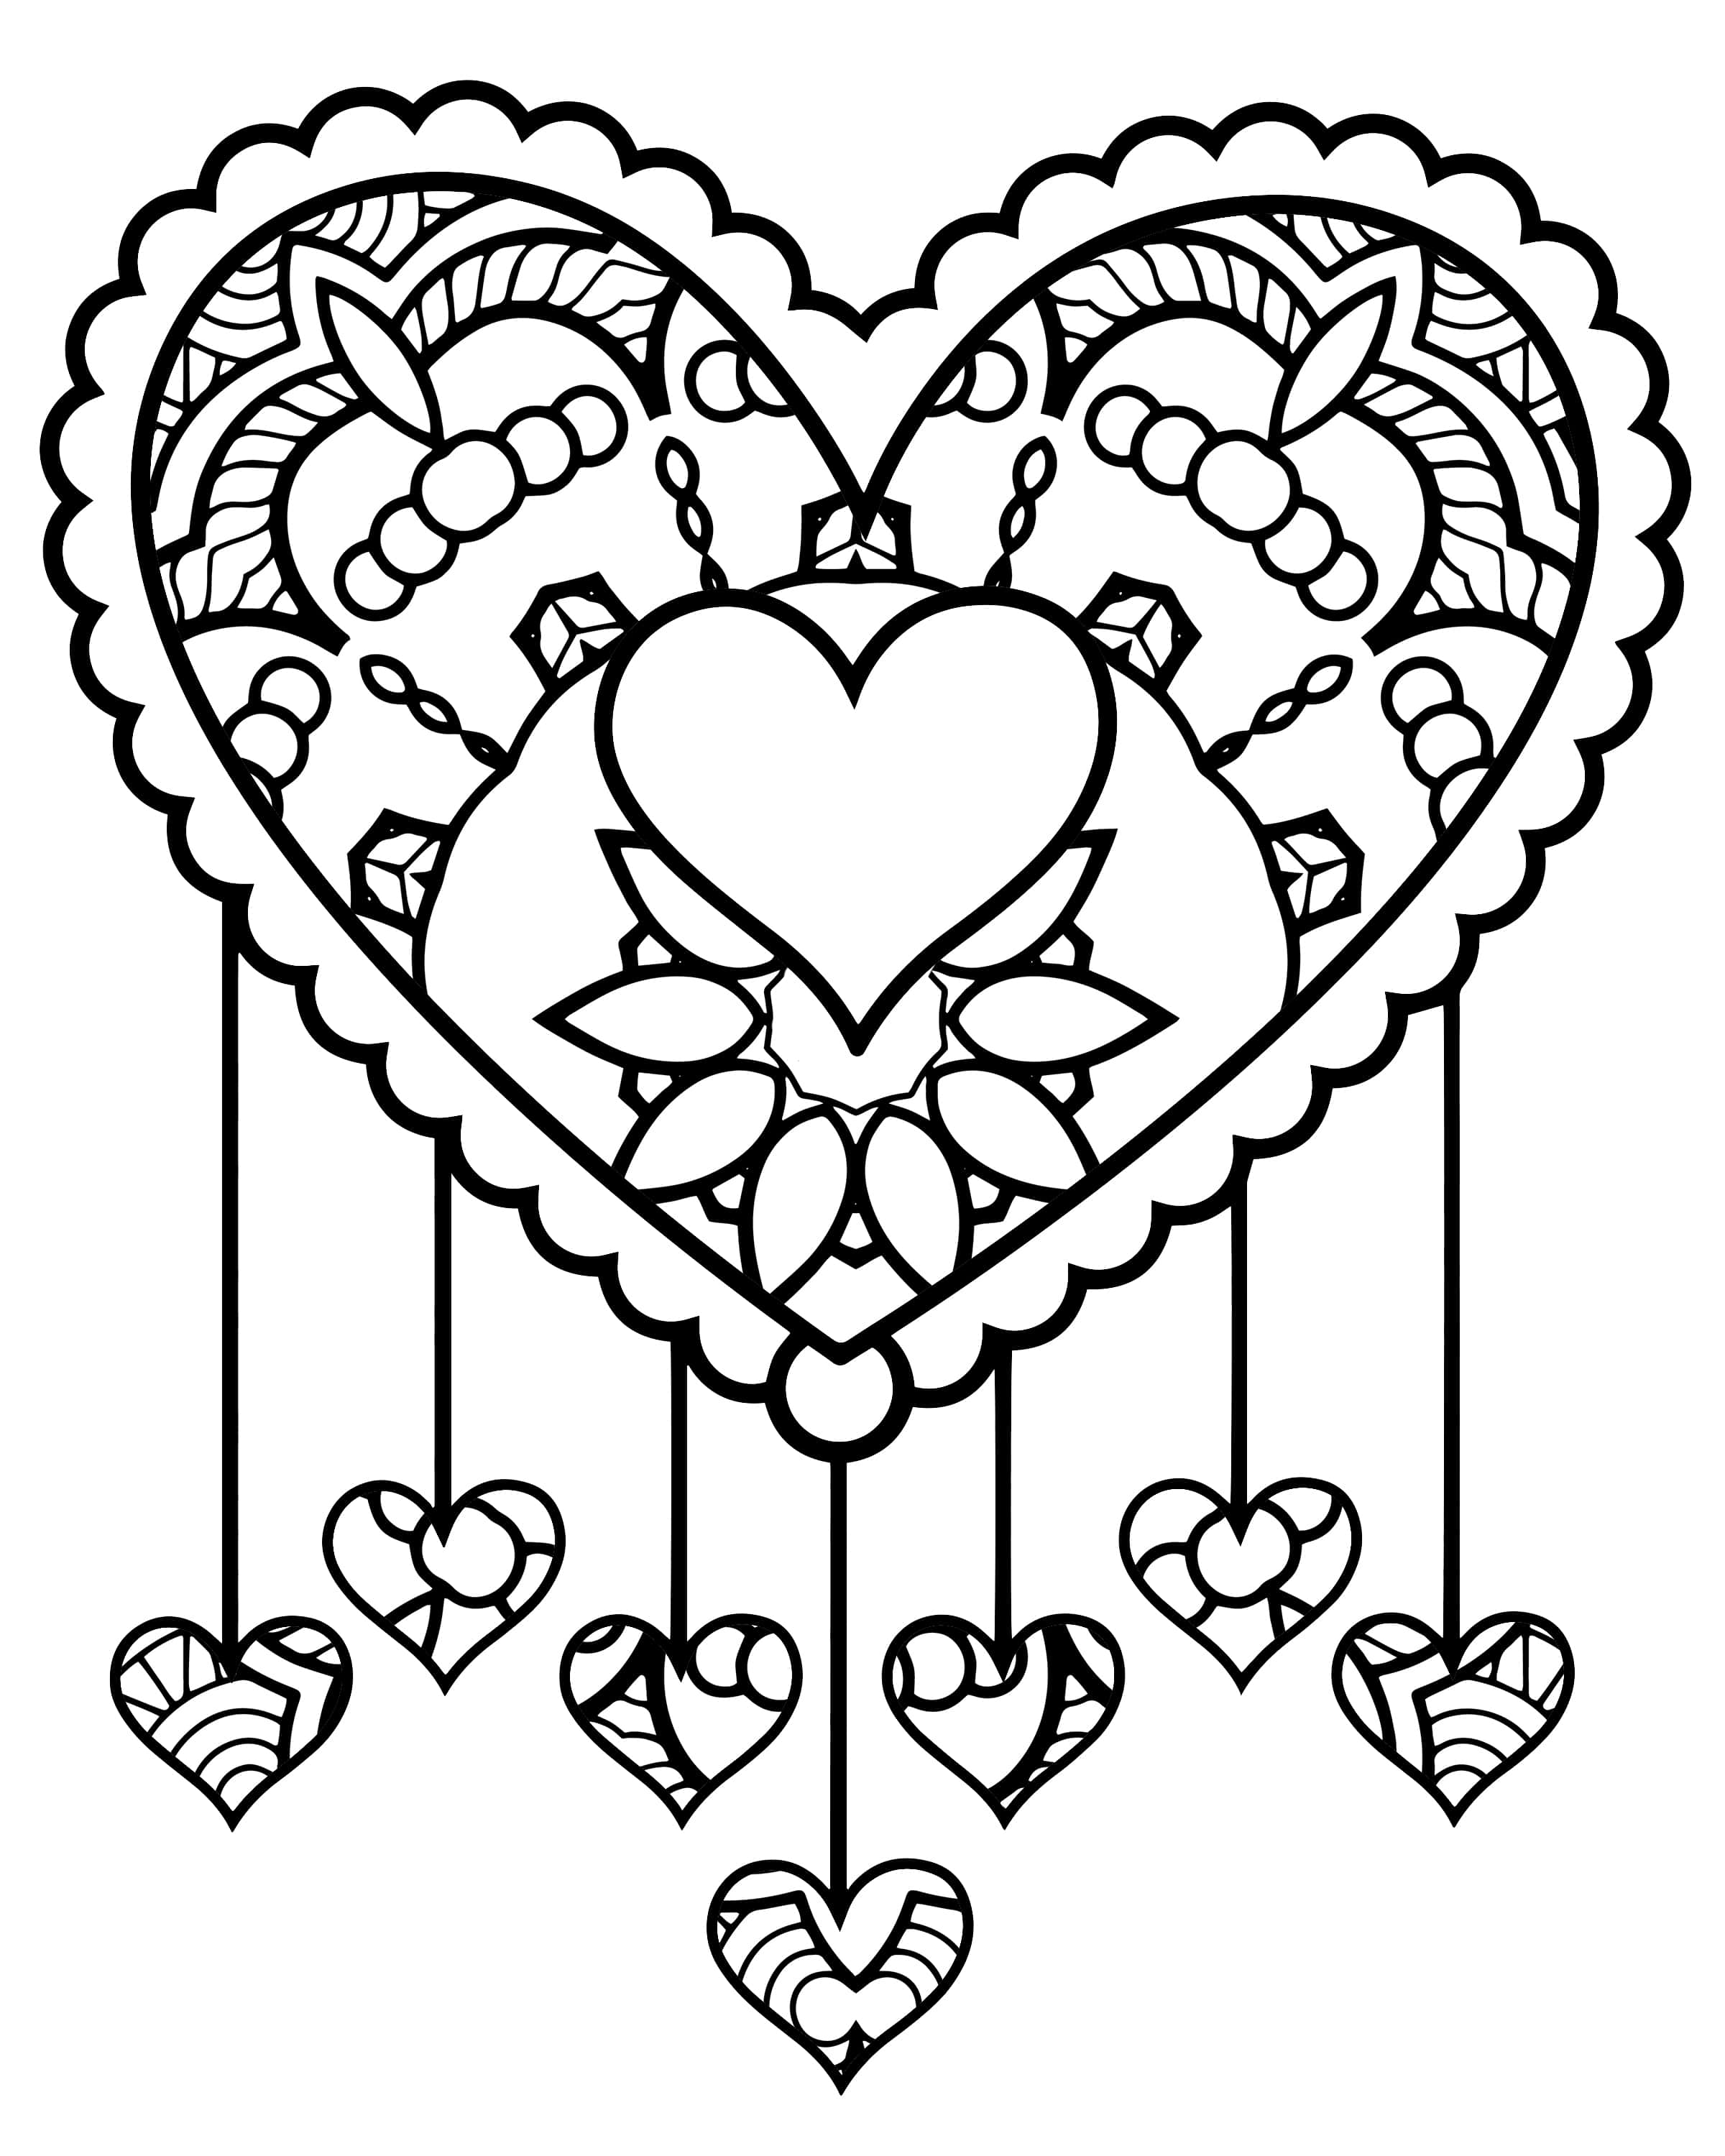 Coloring Pages For Girls 7 Years Old